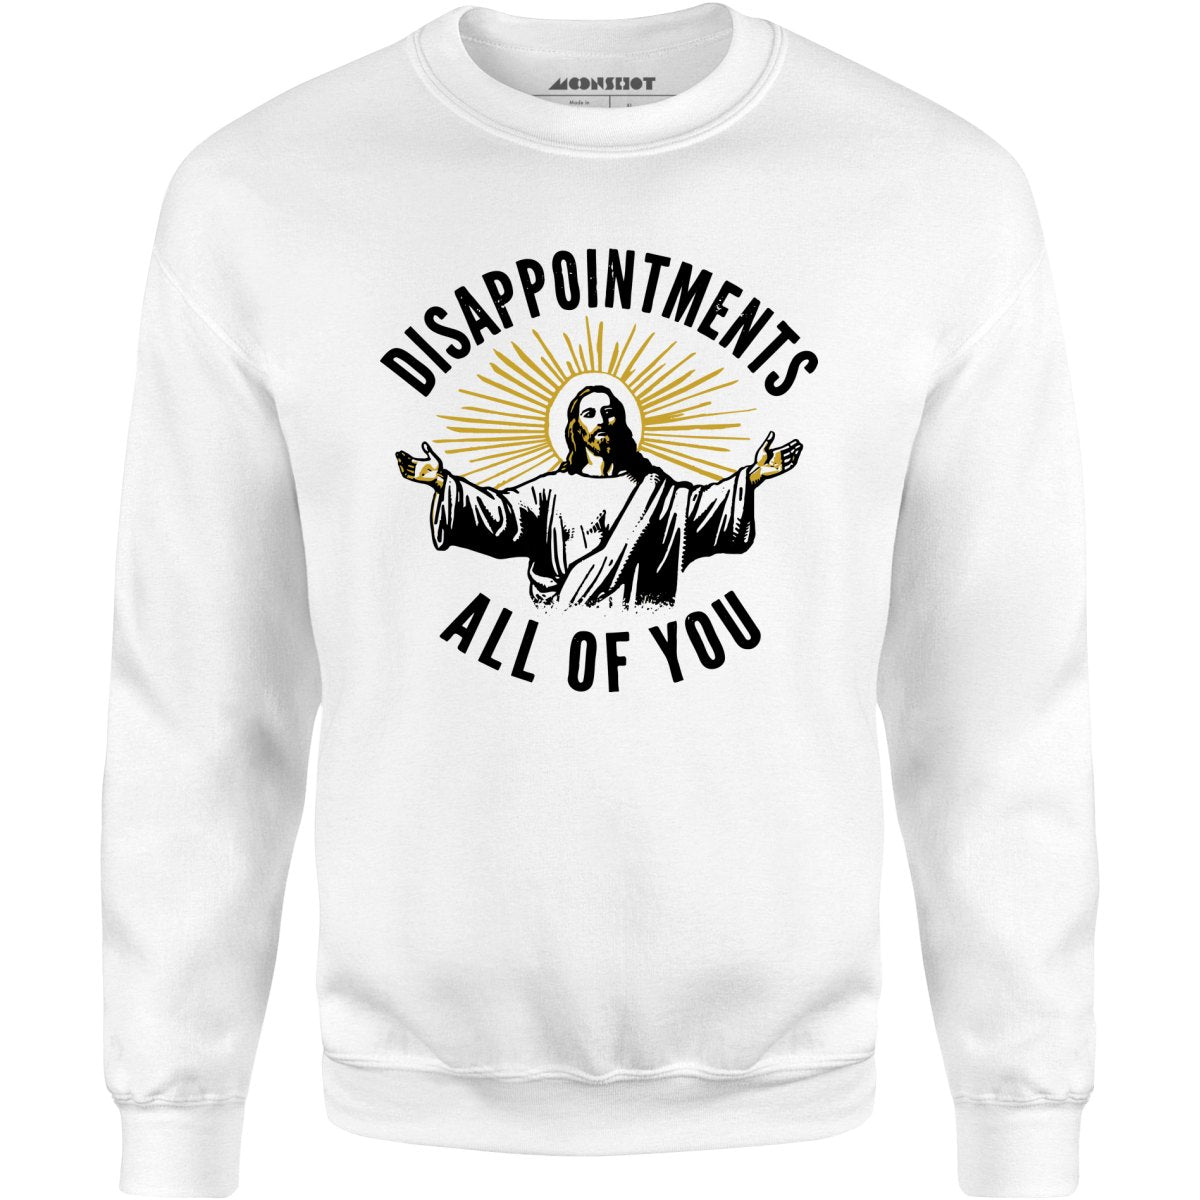 Disappointments All of You - Unisex Sweatshirt